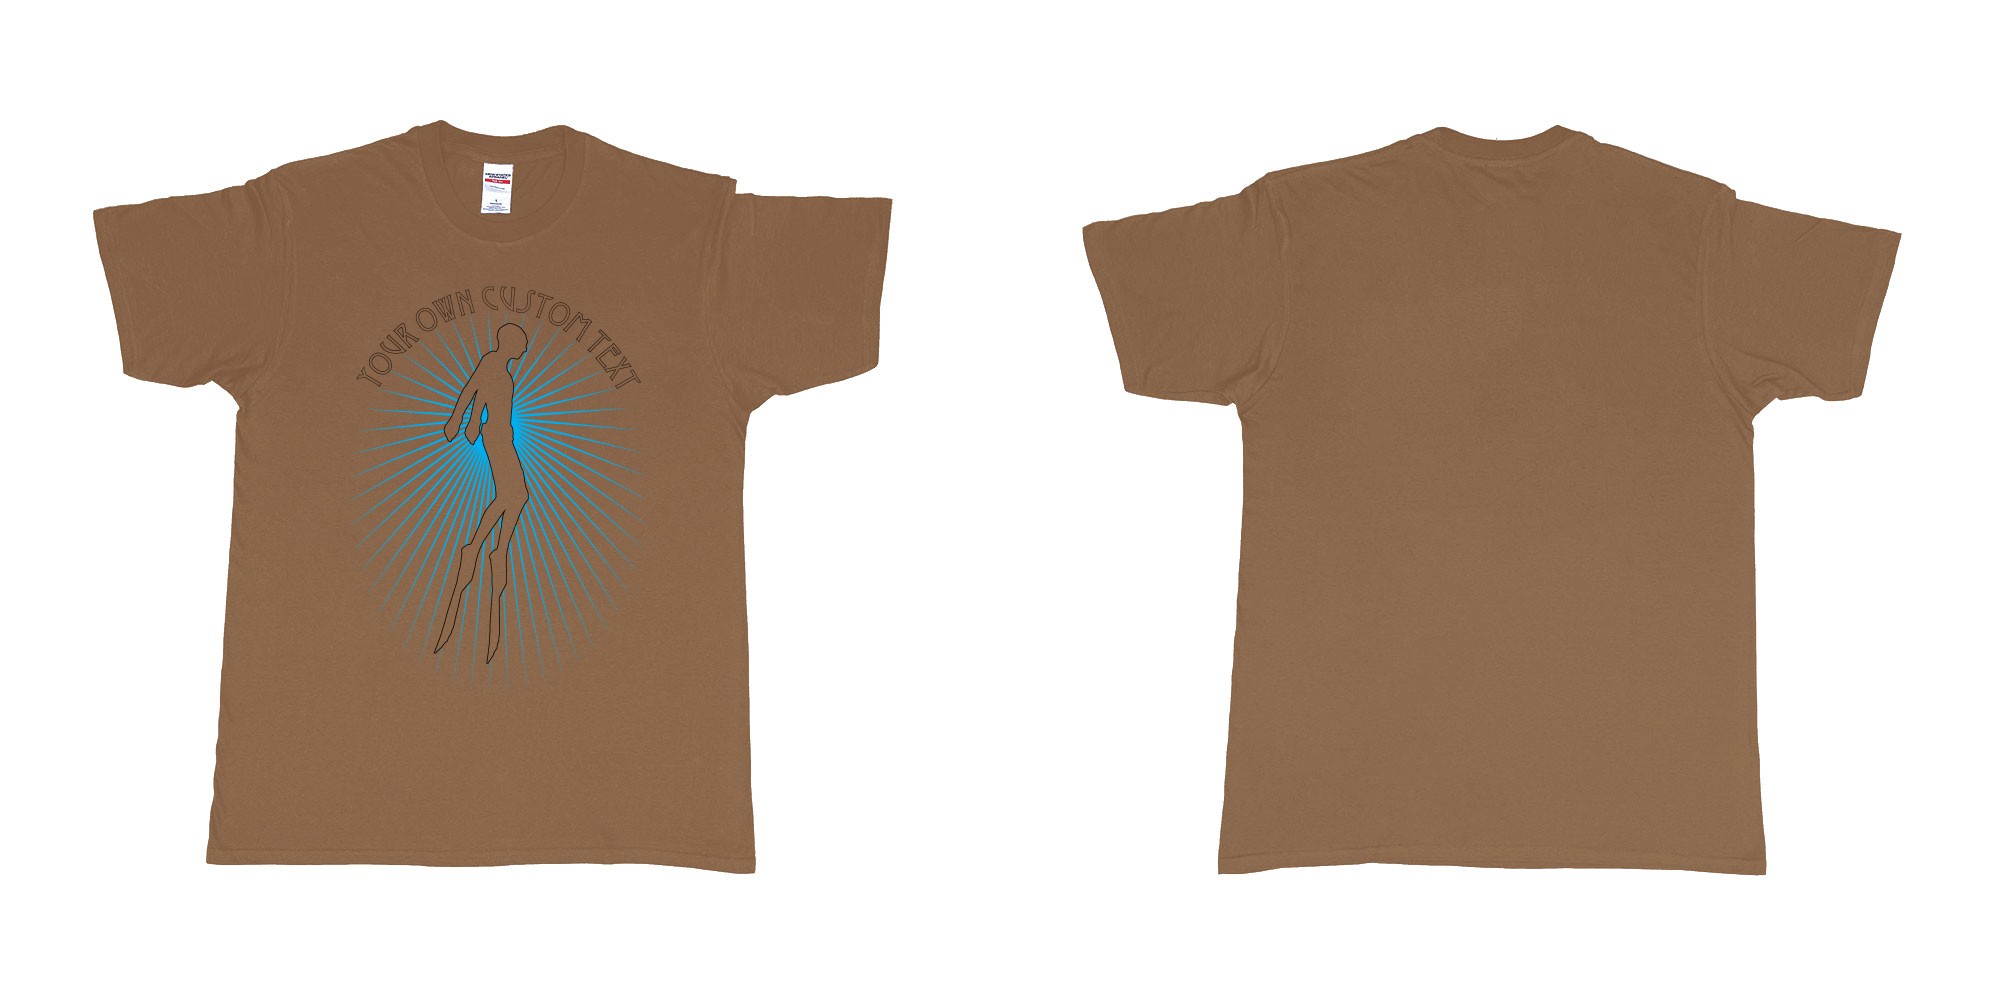 Custom tshirt design freediver swimming sun rays in fabric color chestnut choice your own text made in Bali by The Pirate Way